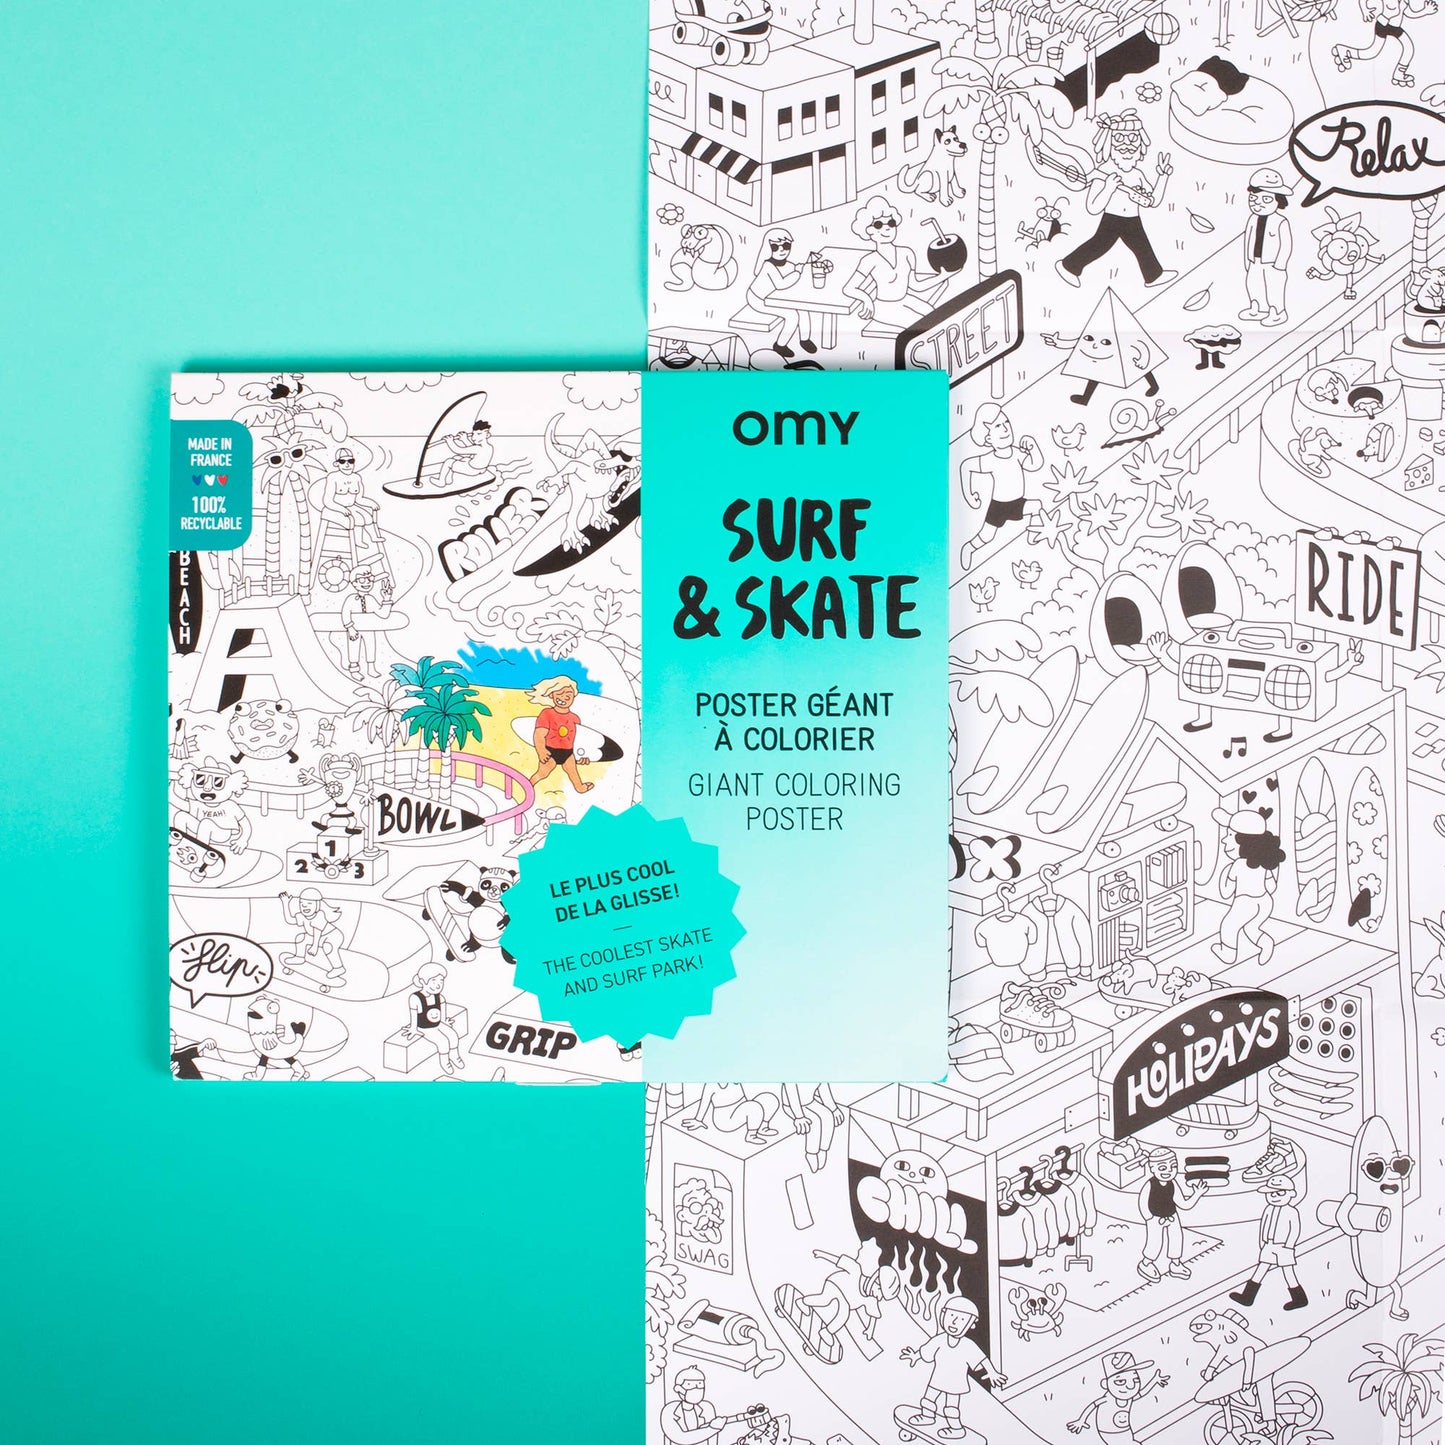 Surf & Skate - Giant Coloring Poster